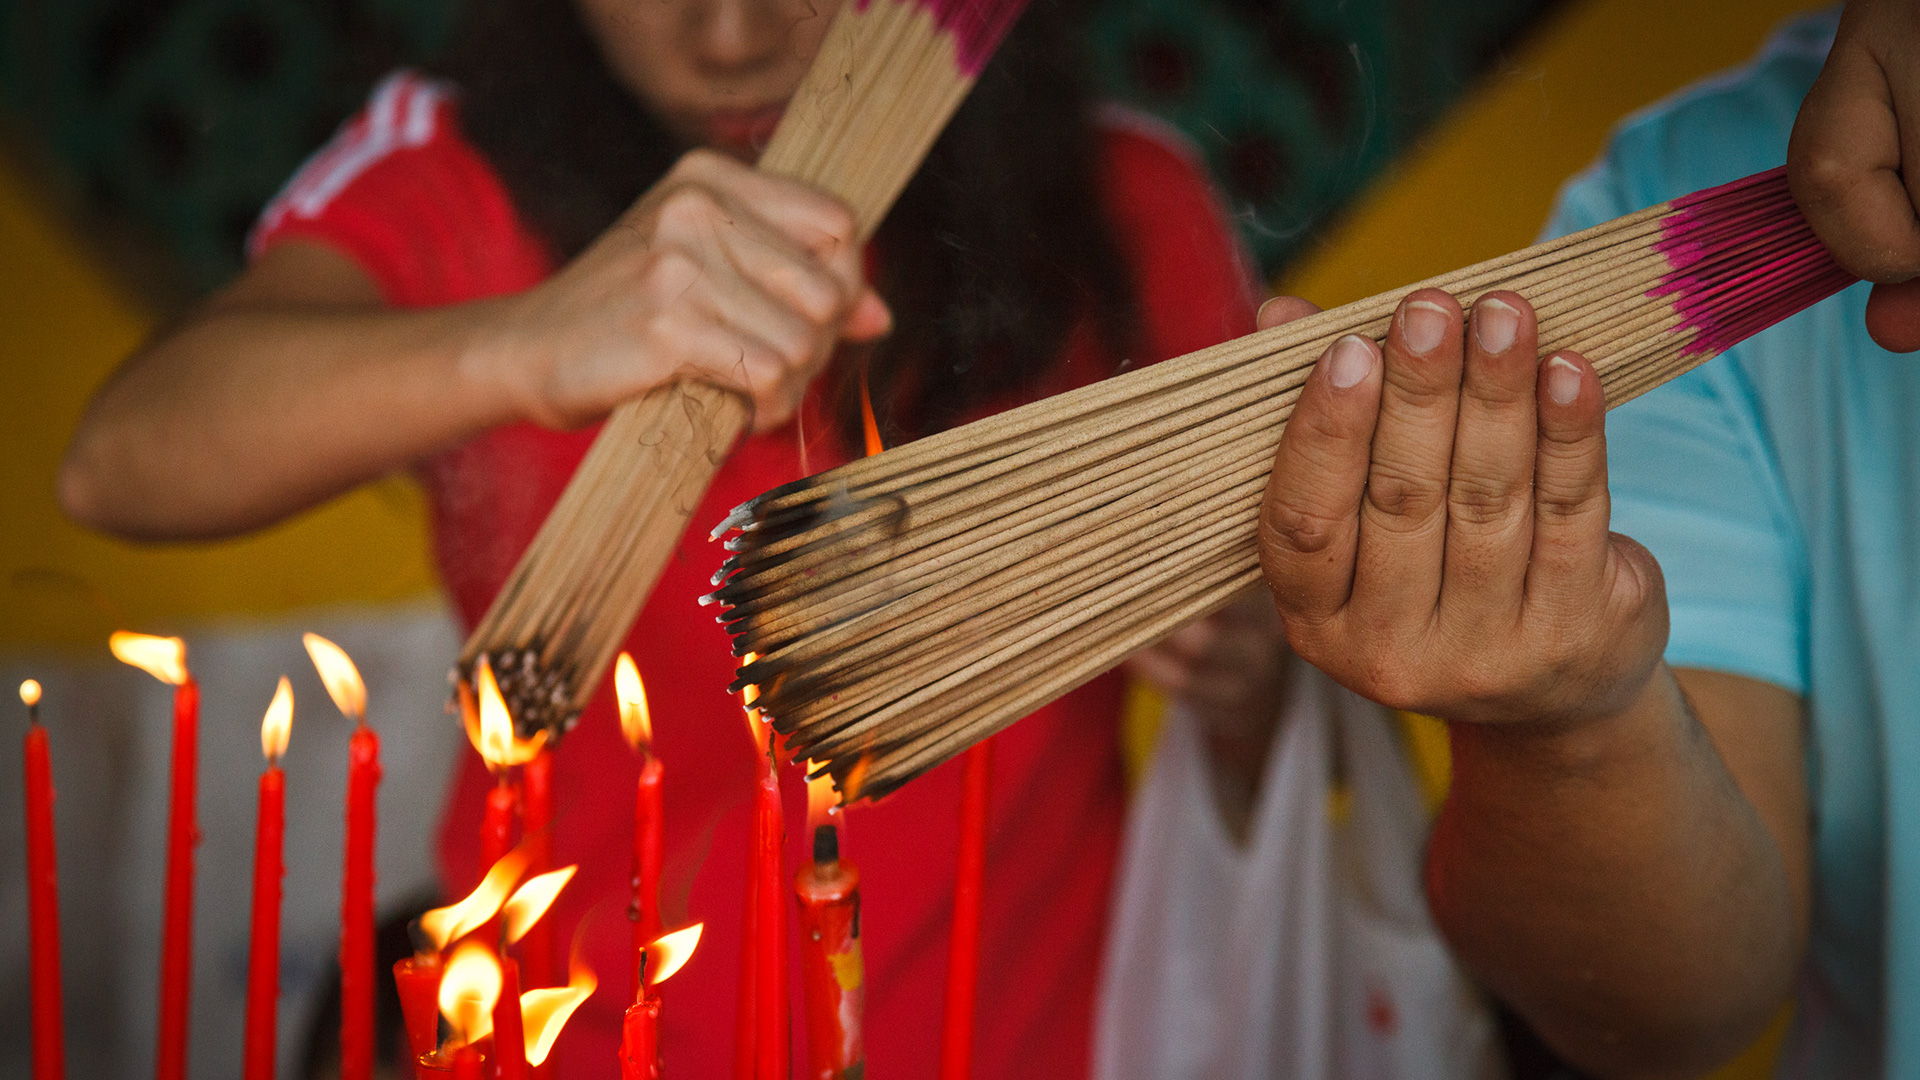 Devotees light incense in a Buddhist temple. 